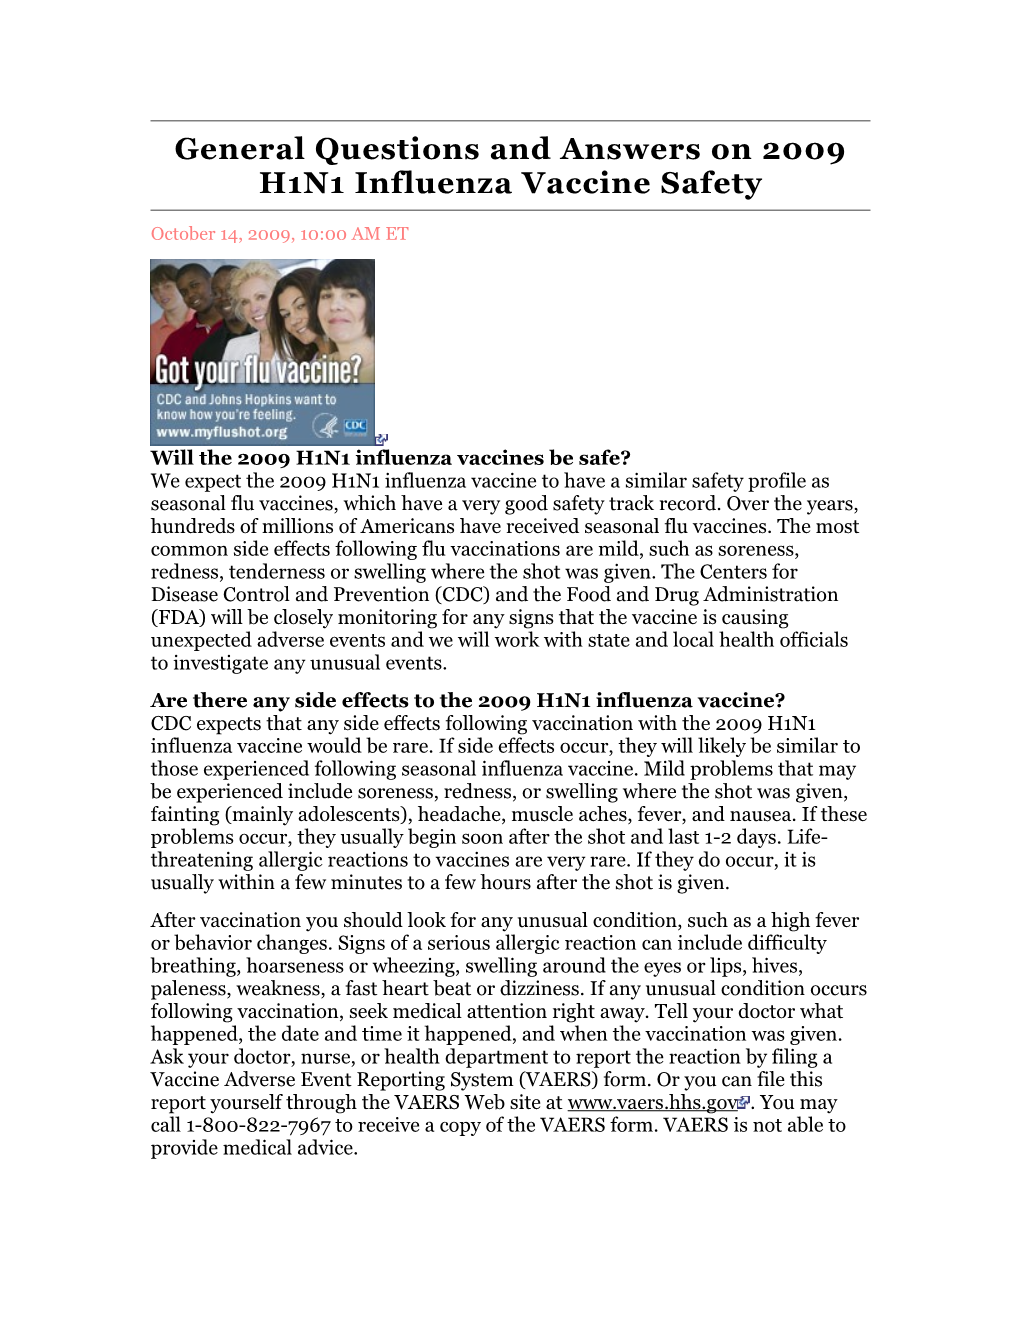 General Questions and Answers on 2009 H1N1 Influenza Vaccine Safety